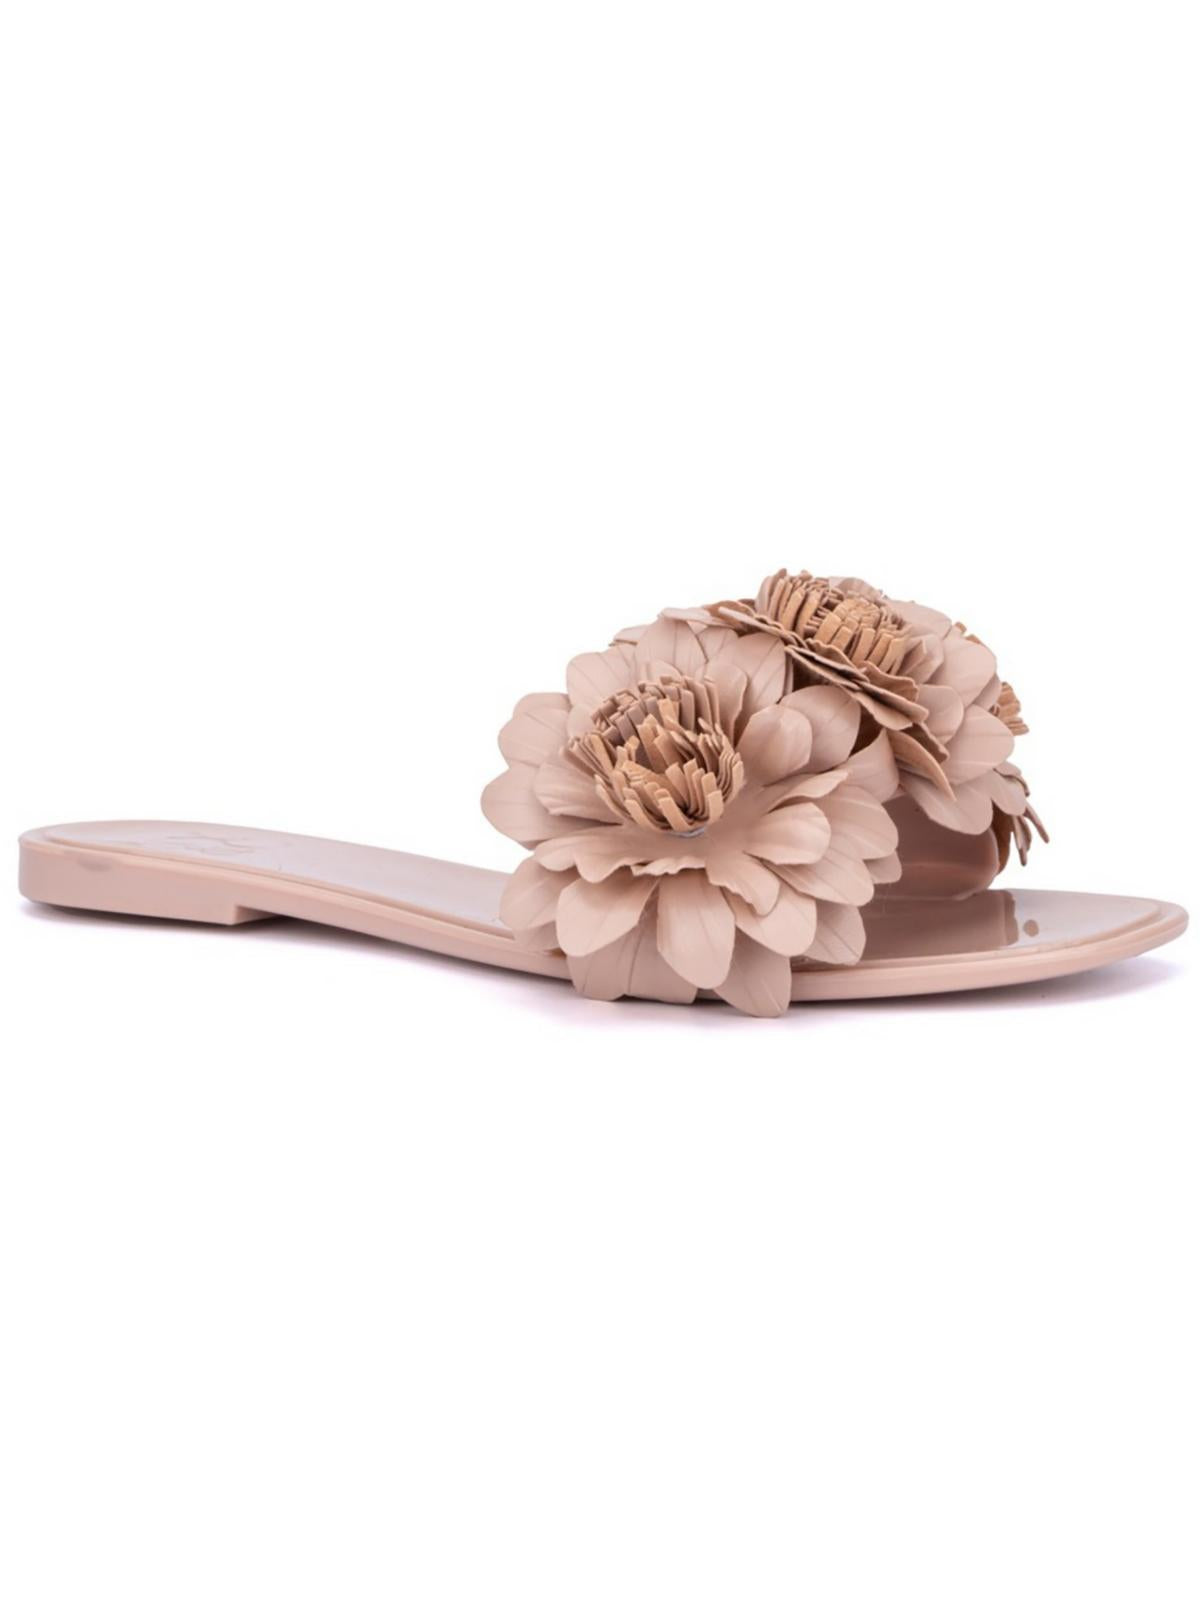 New York And Company Anella 3d Flower Slide Sandal In Nude